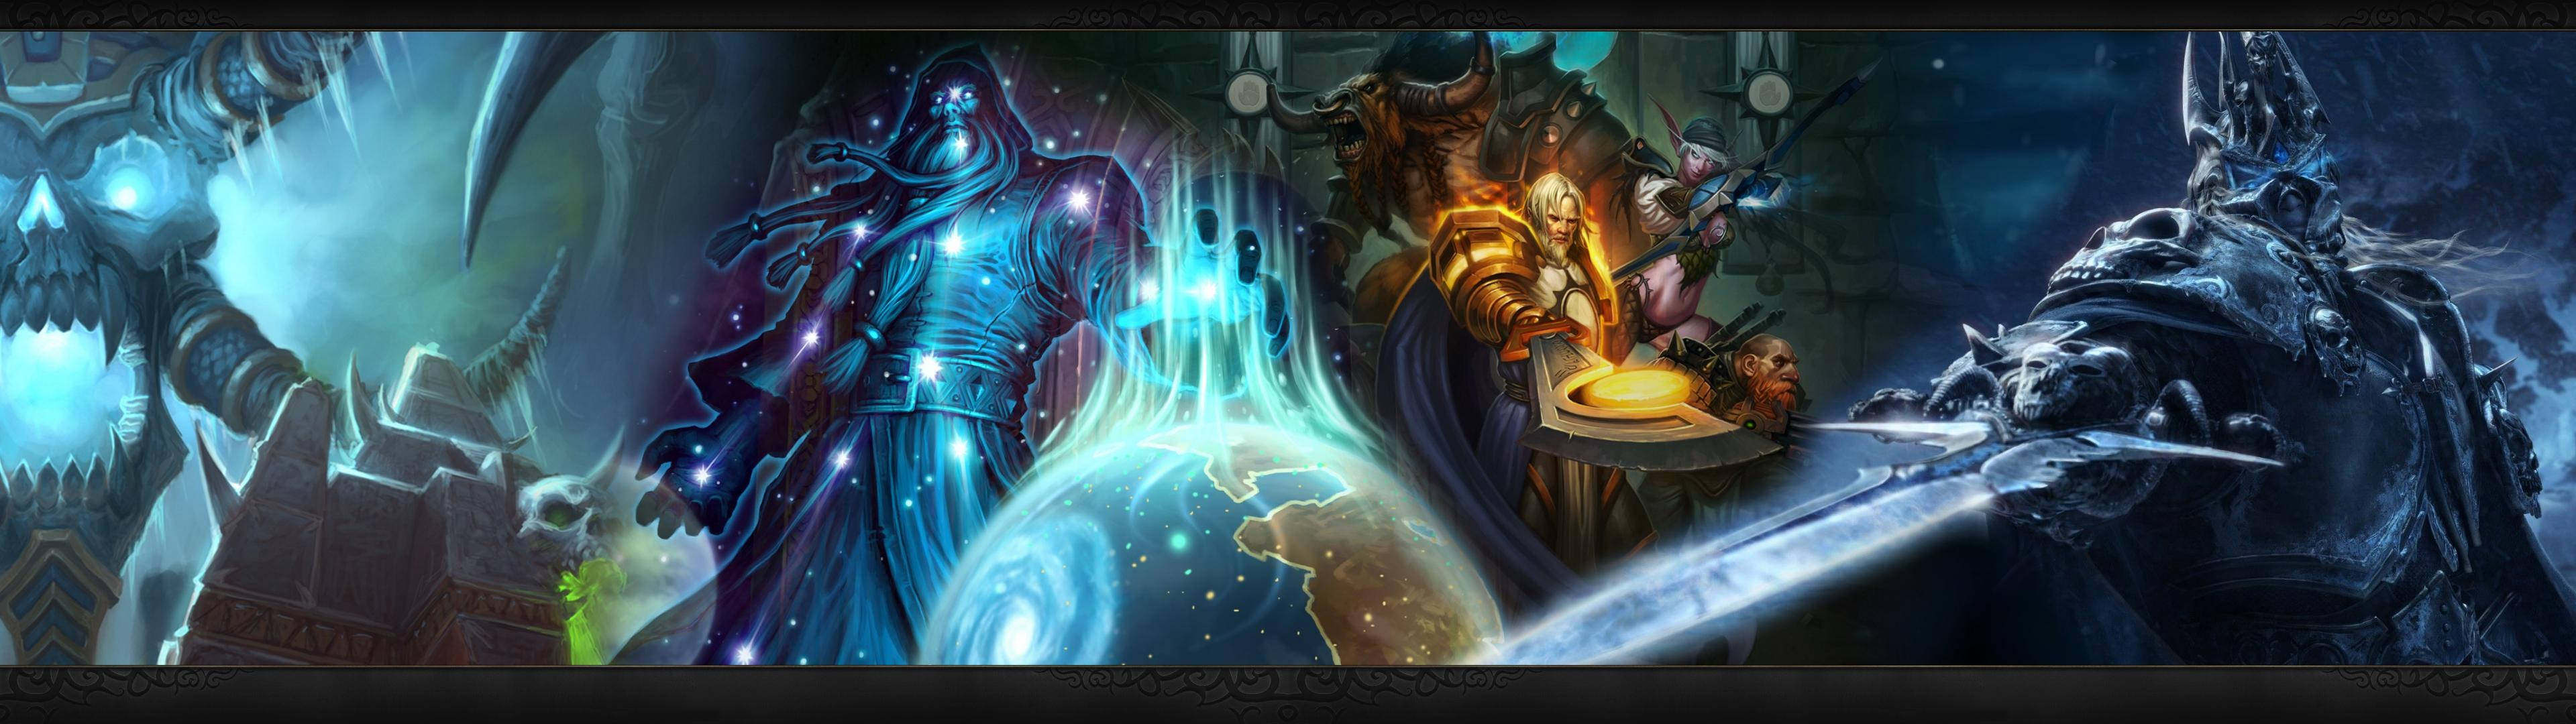 Two World of Warcraft Characters Fighting on Dual Monitor Wallpaper